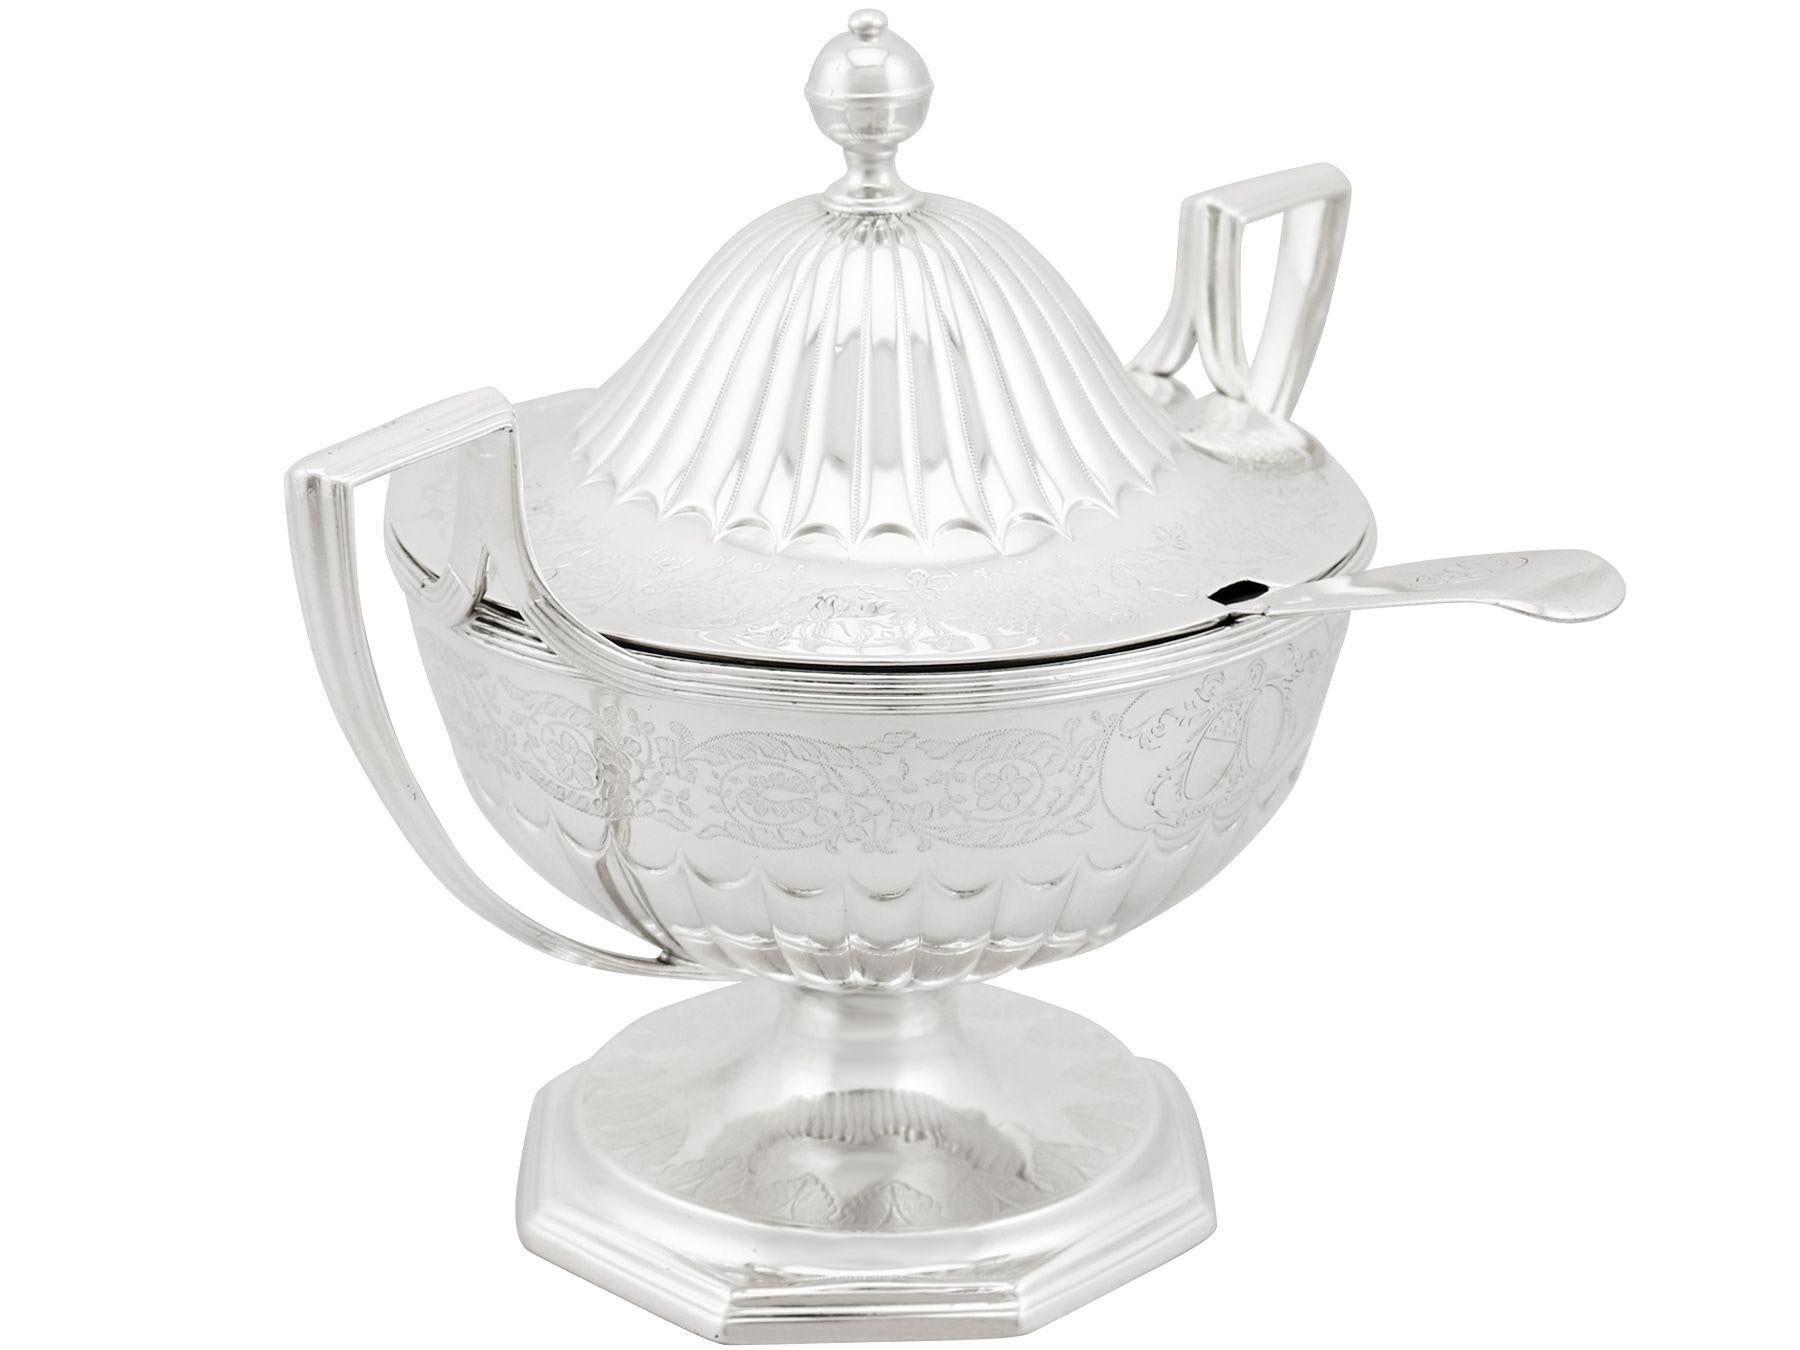 Late 18th Century Antique Sterling Silver Sauce Tureens